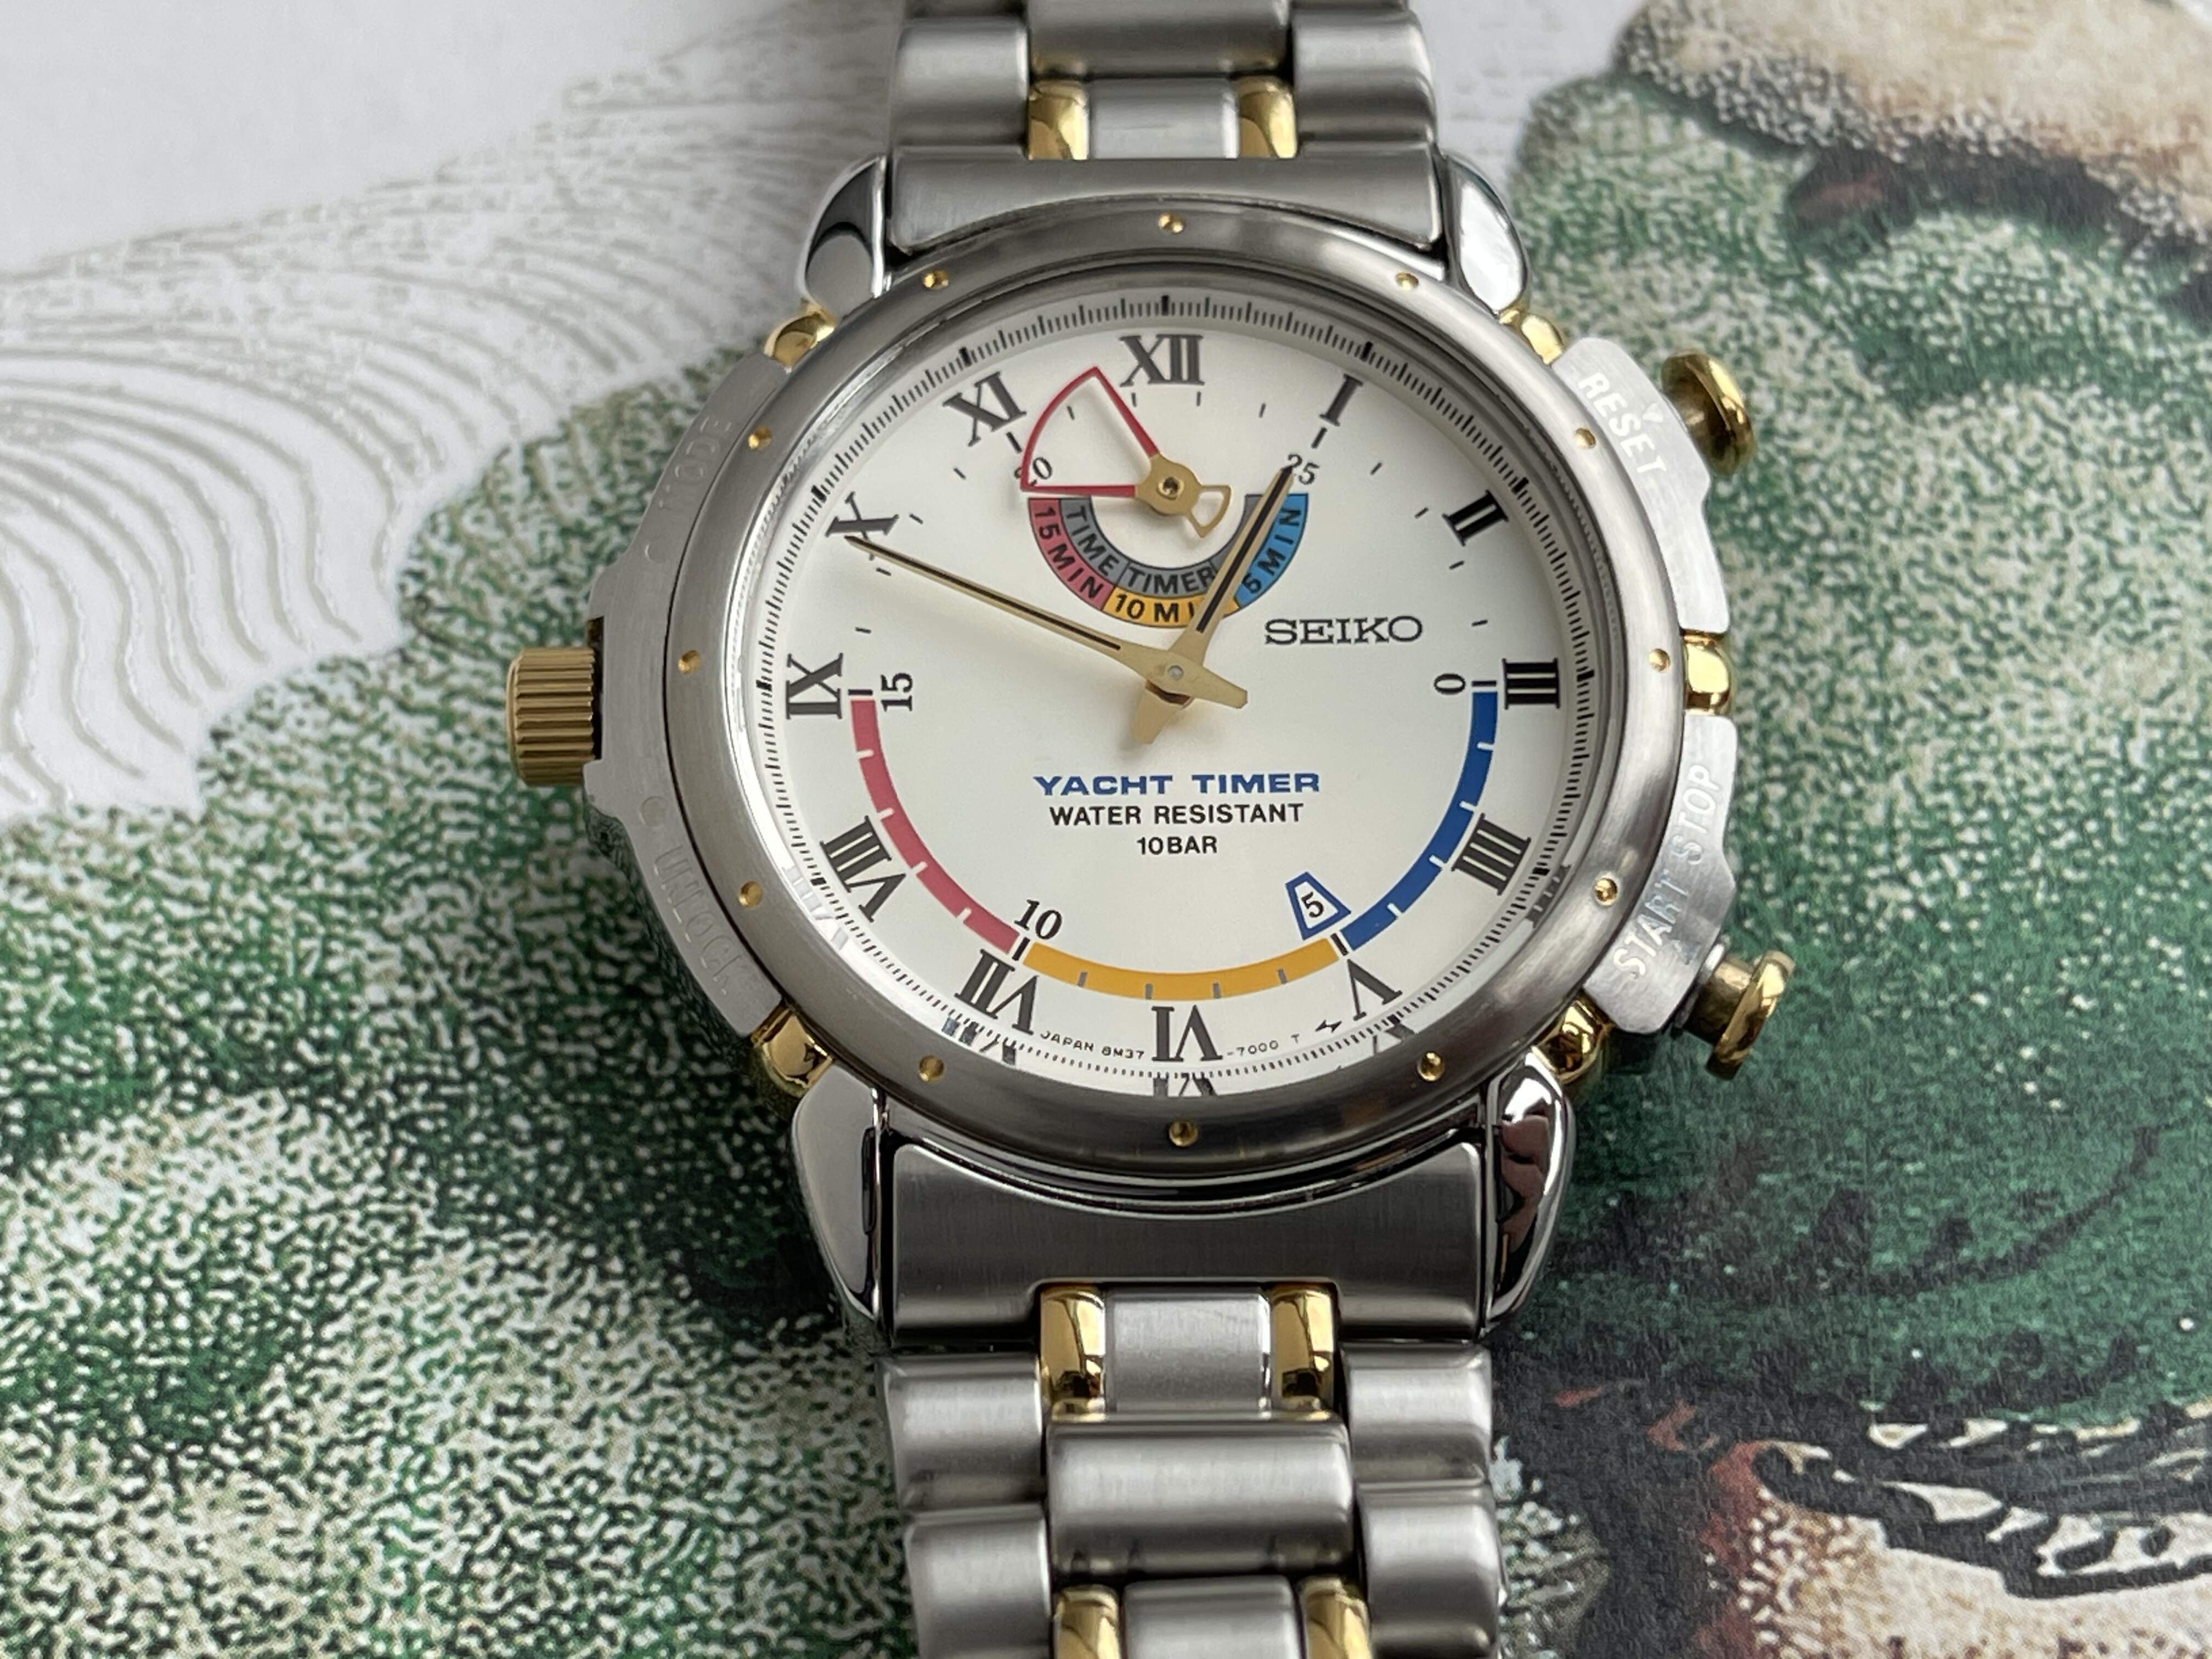 Seiko Yacht Timer 8M37-7000 (Sold)